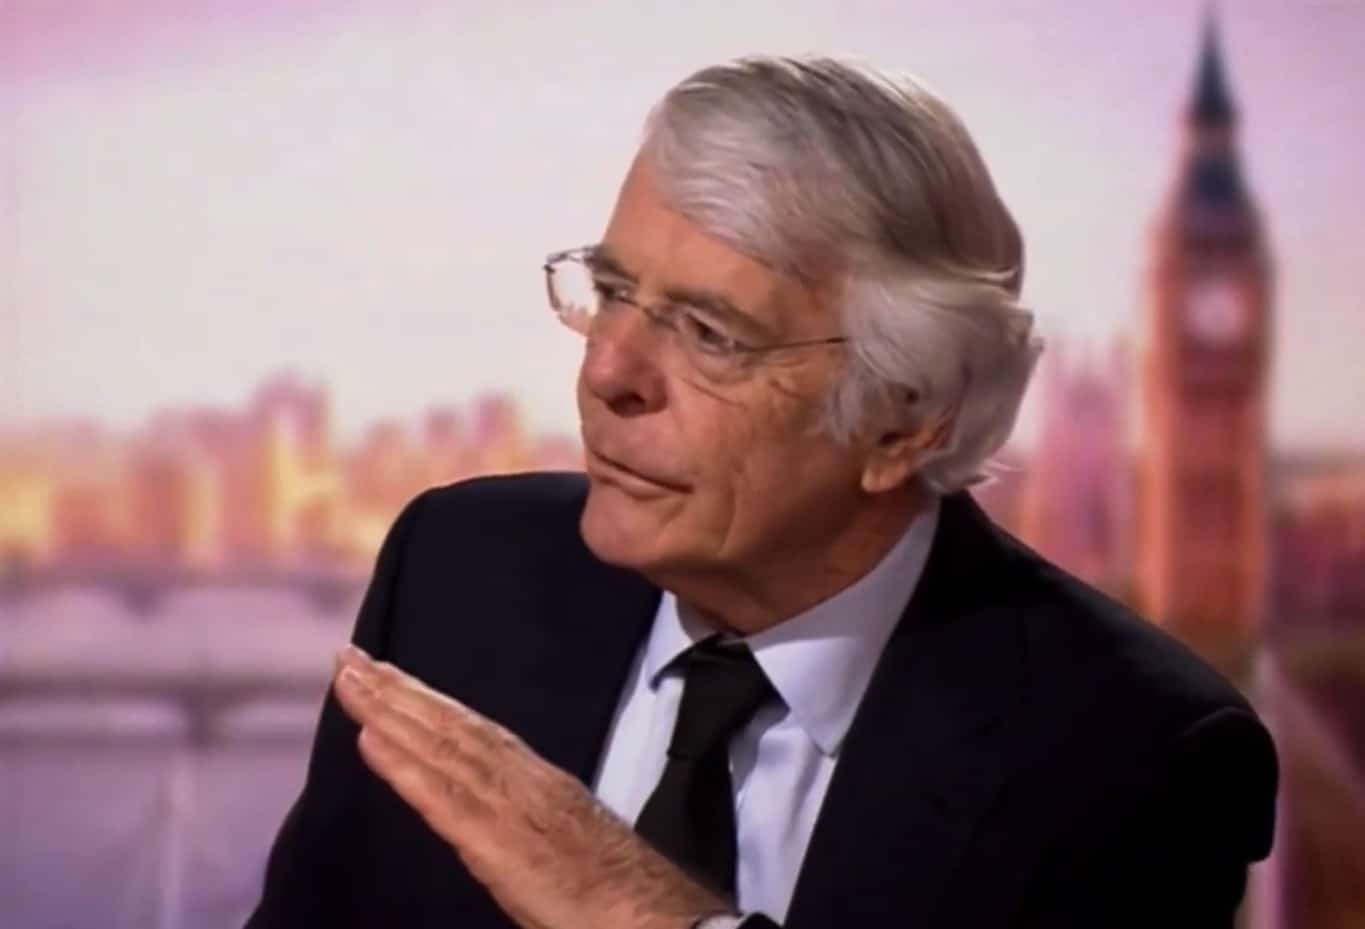 Watch: John Major predicts what will happen to the NHS in the hands of Brexiteers